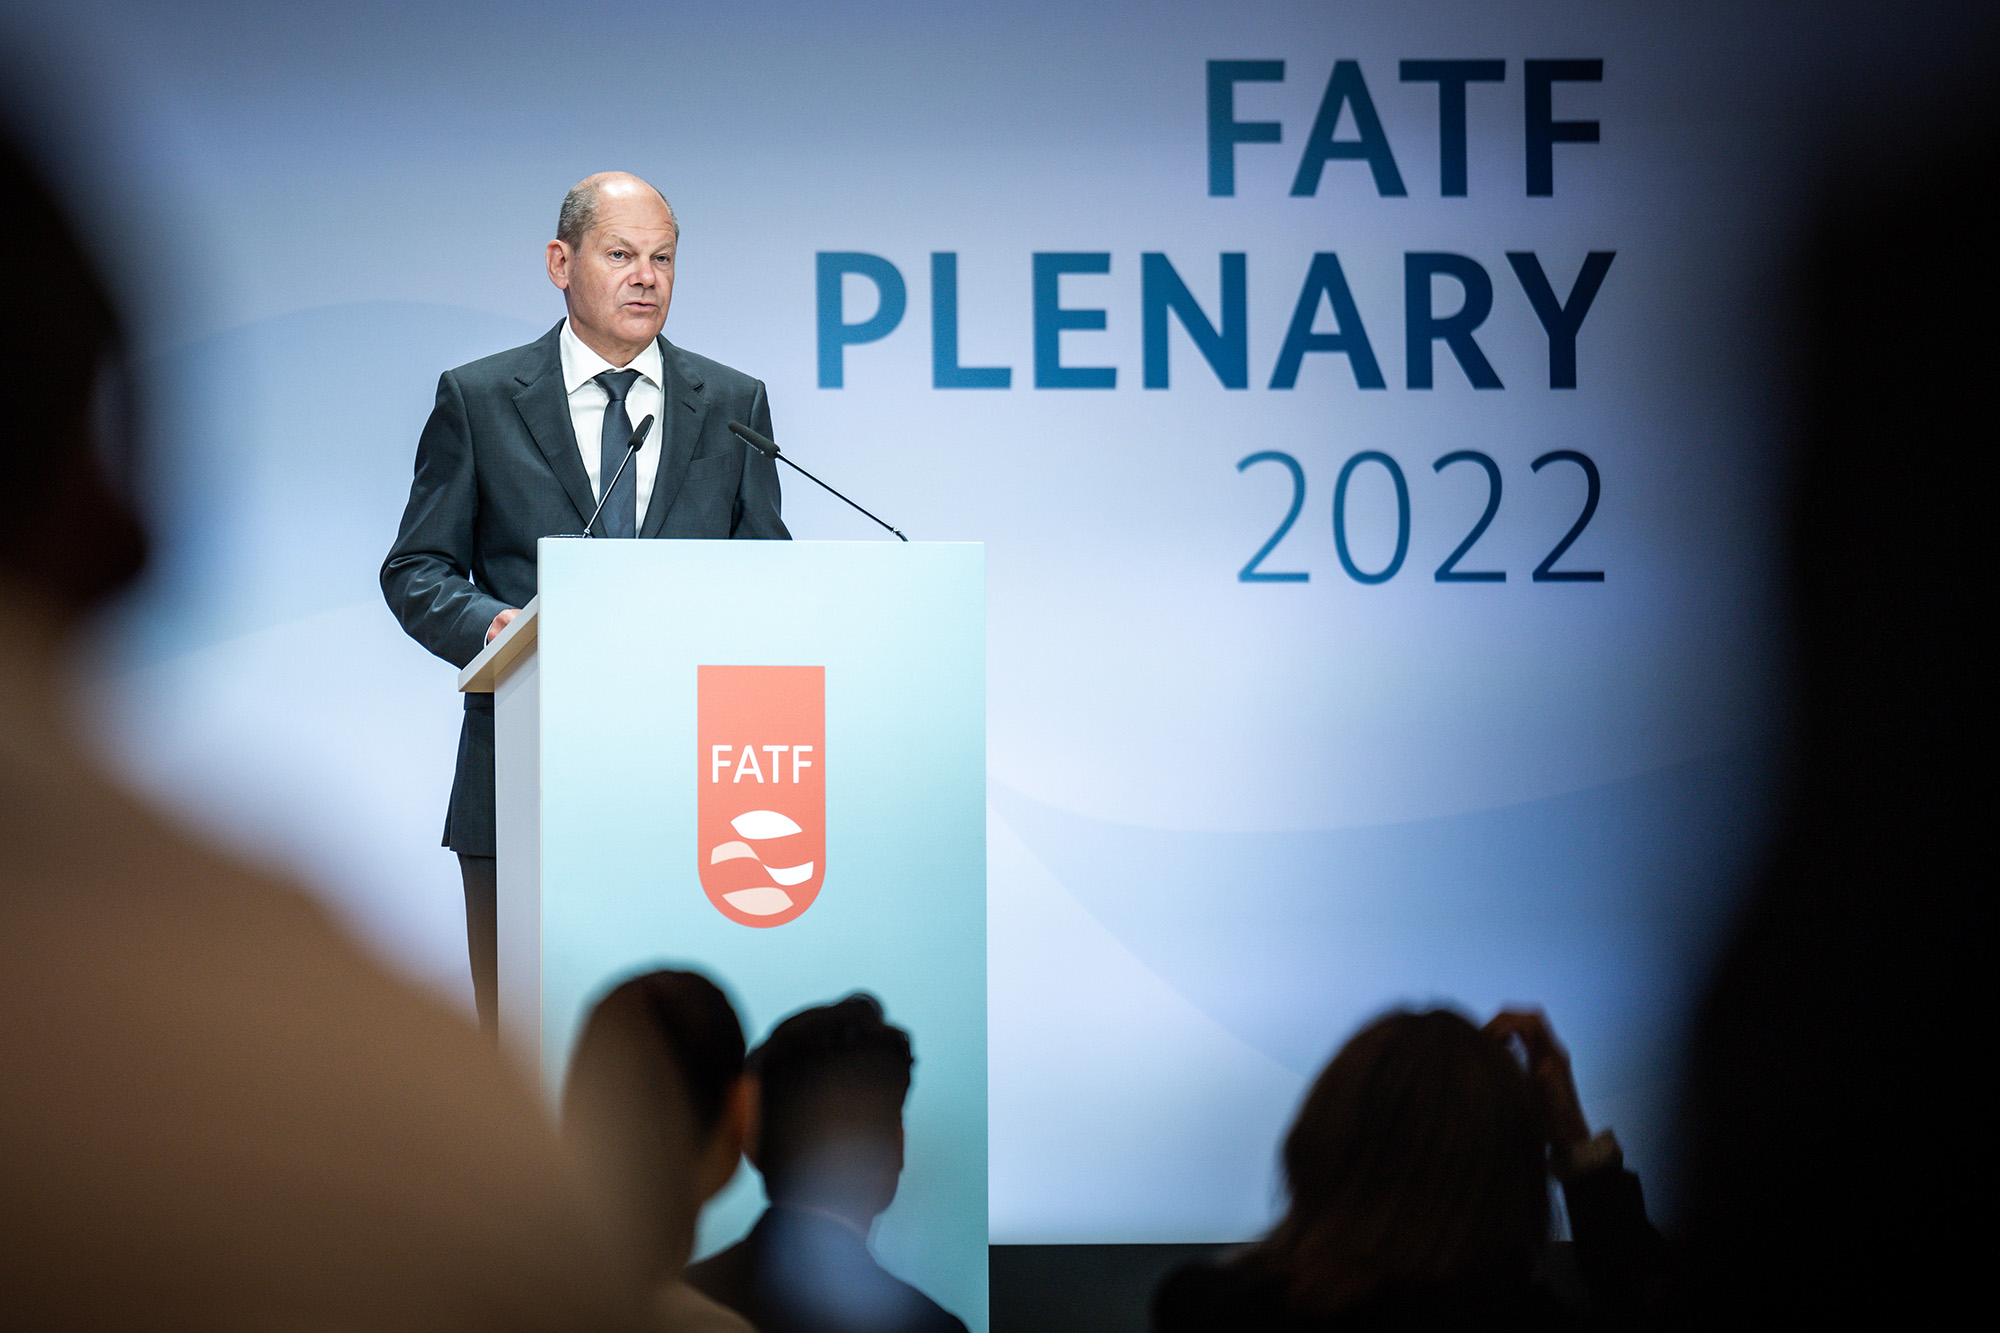 German Chancellor Olaf Scholz speaks at the plenary session of the international Financial Action Task Force (FATF) in Berlin, Germany, on June 14.